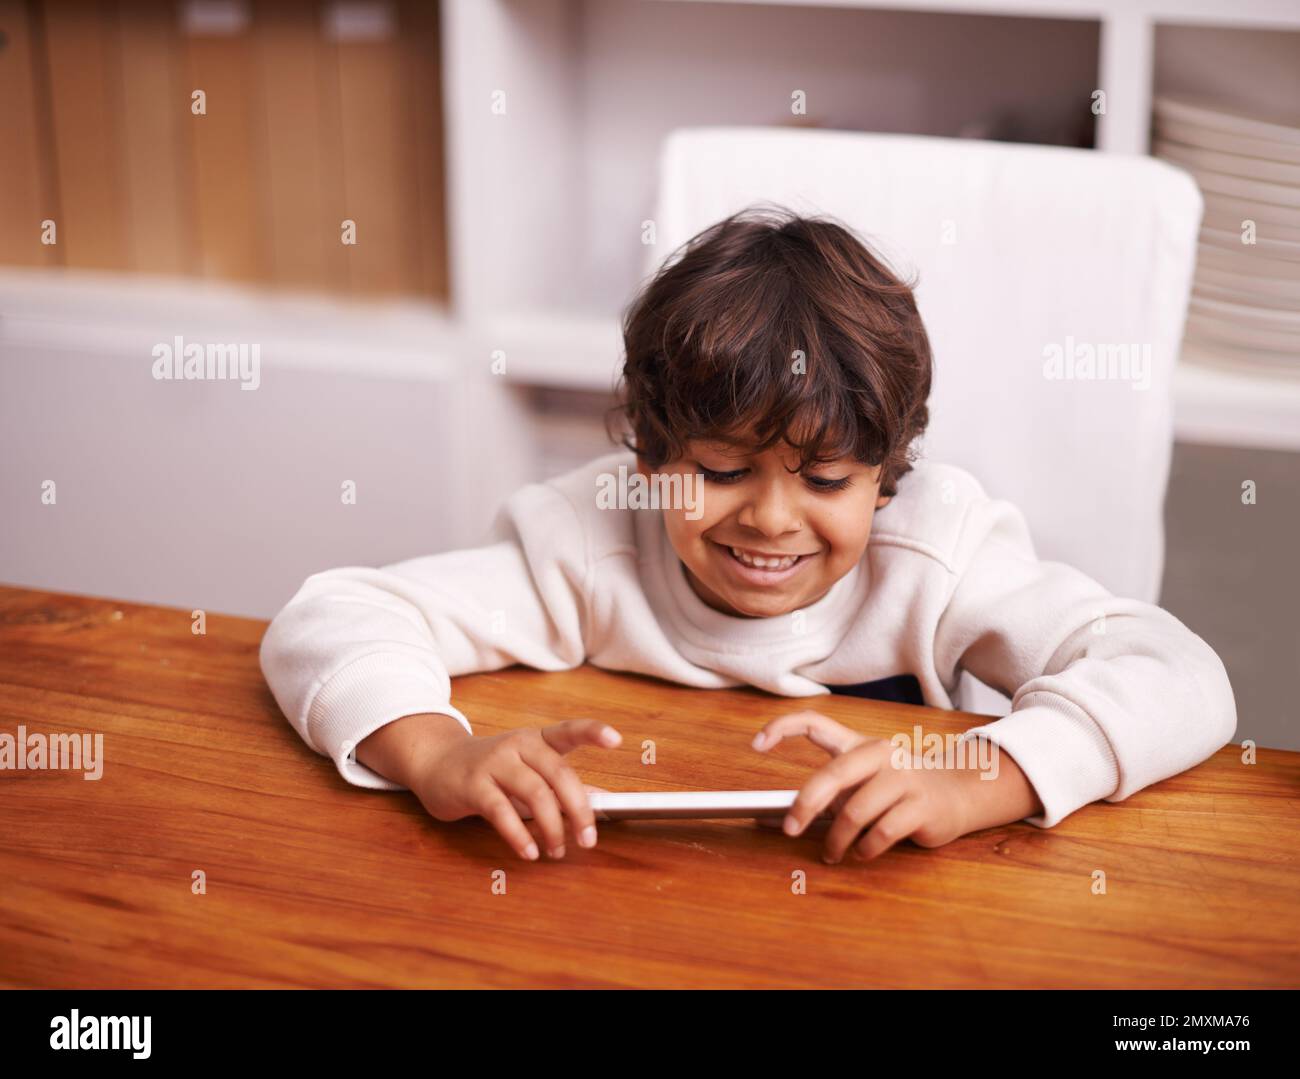 Playing with tech toys. a little boy playing with a mobile phone at home. Stock Photo